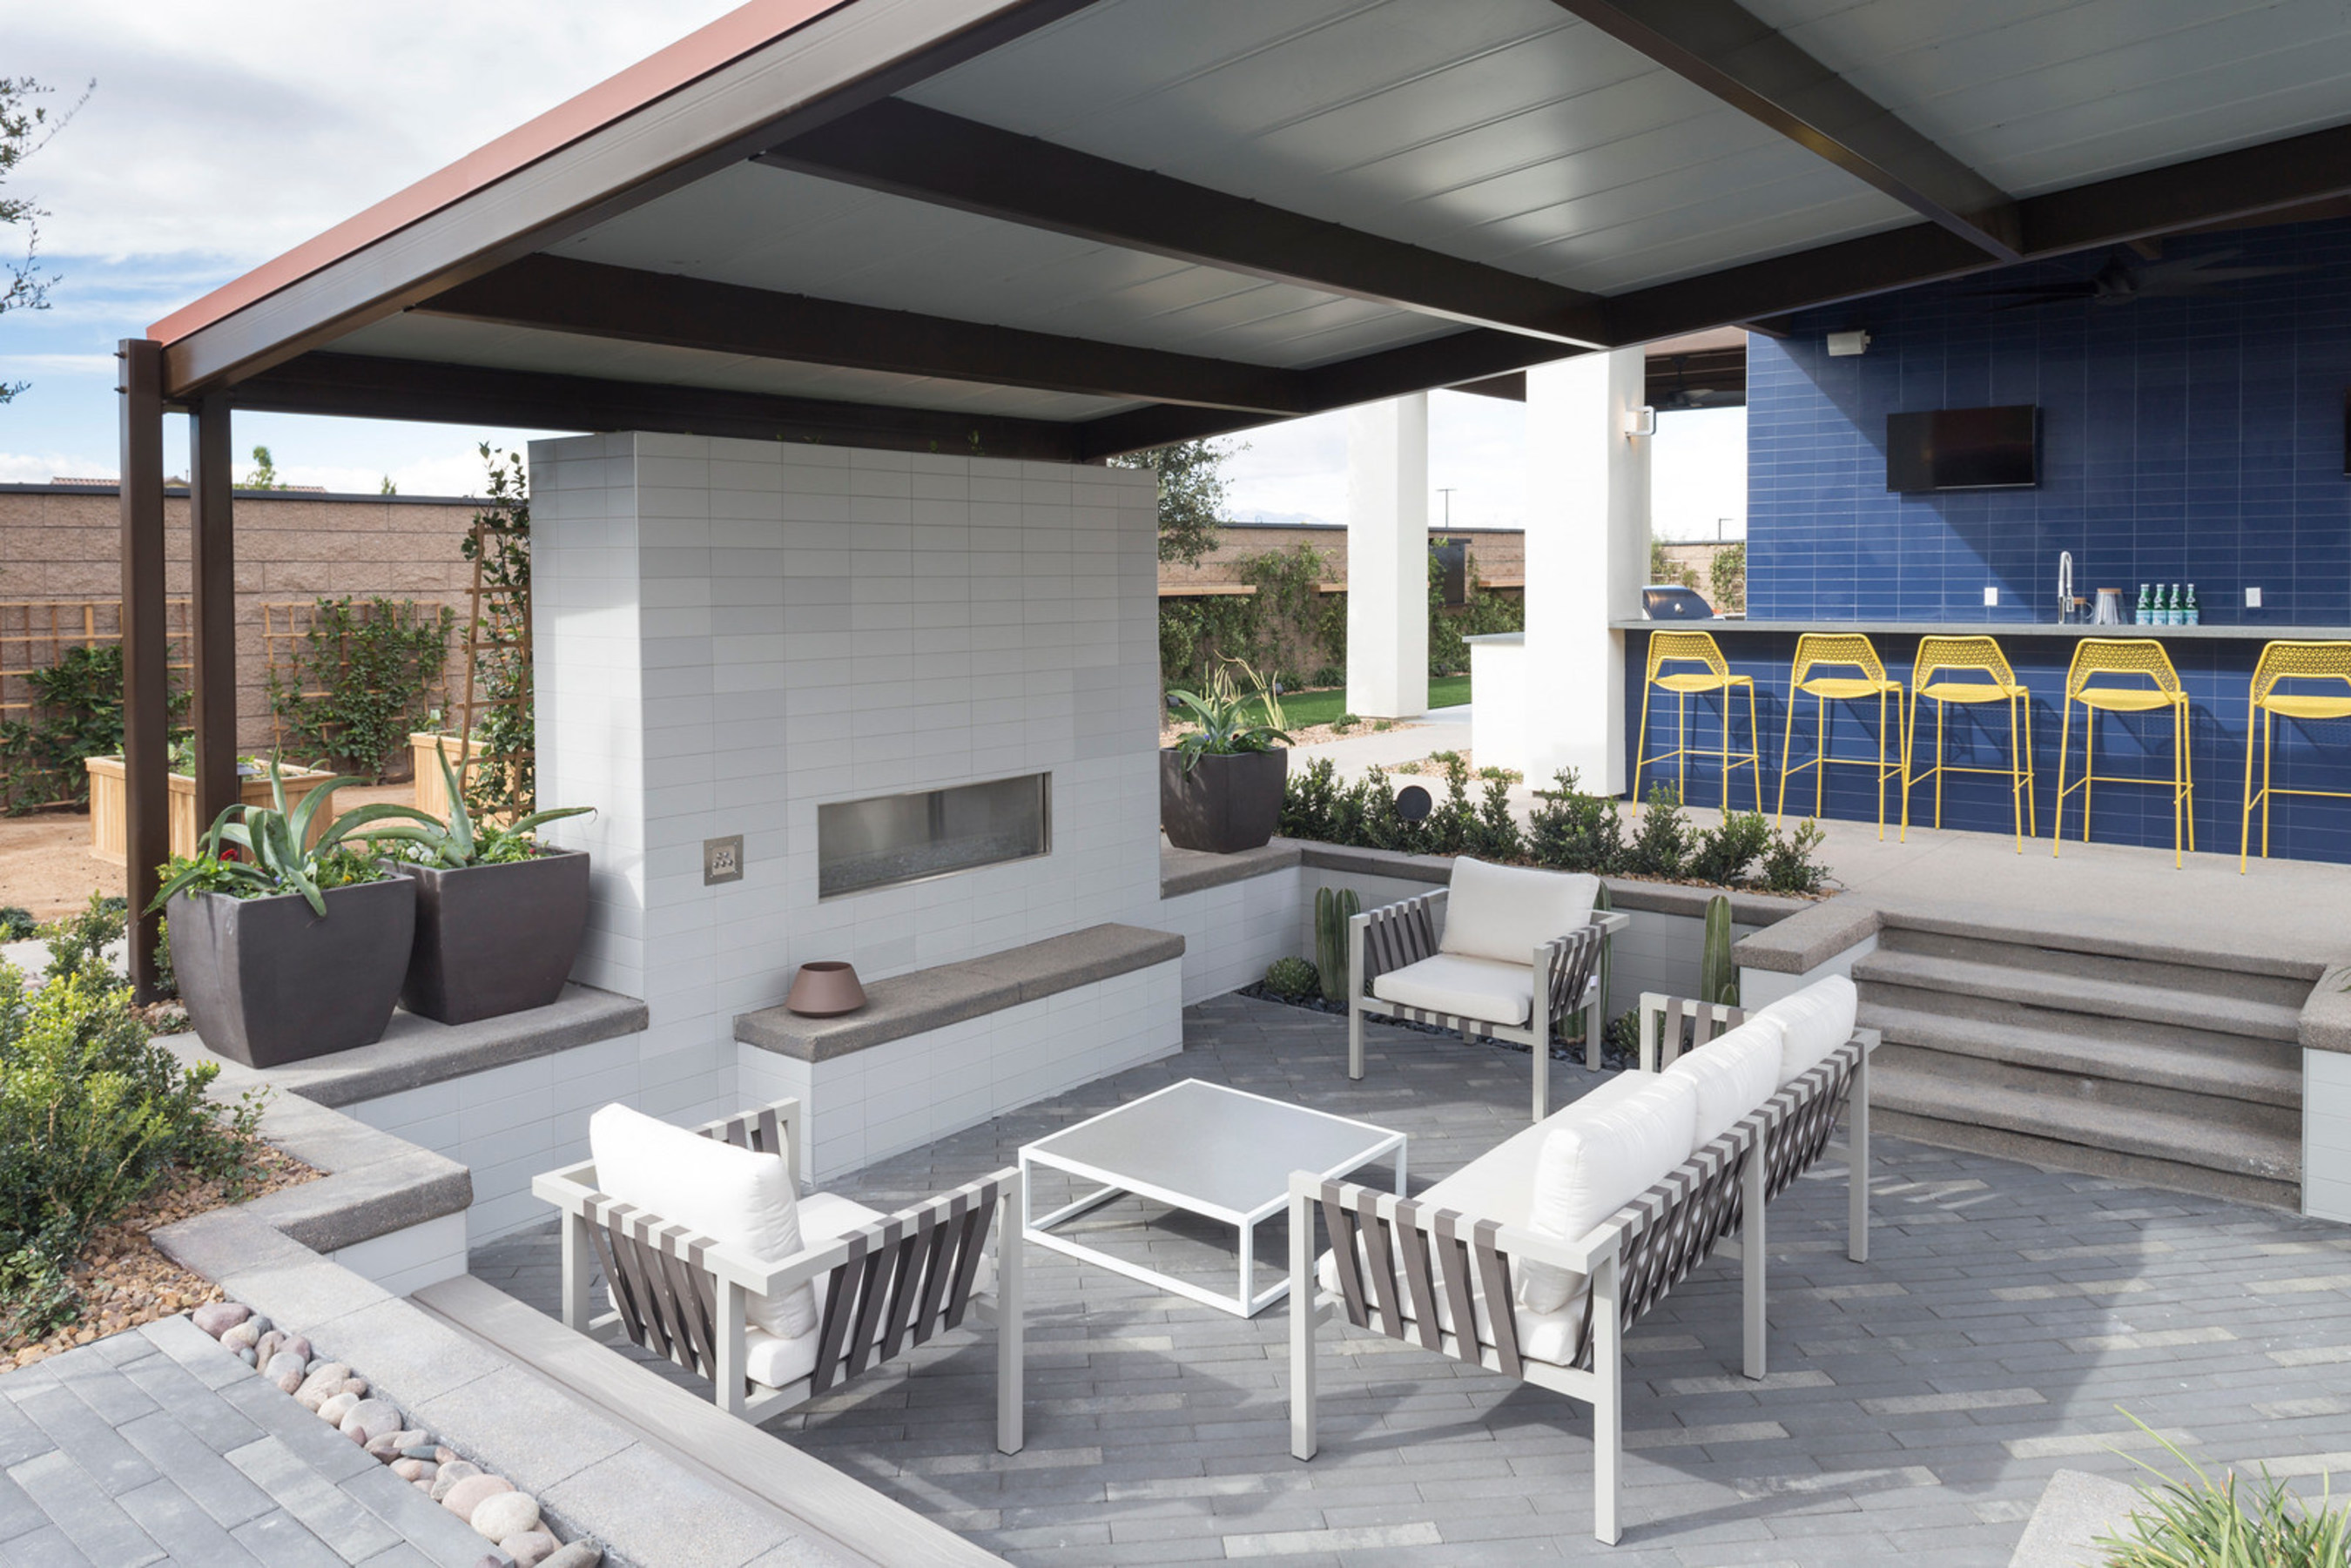 An outdoor living space with fireplace.